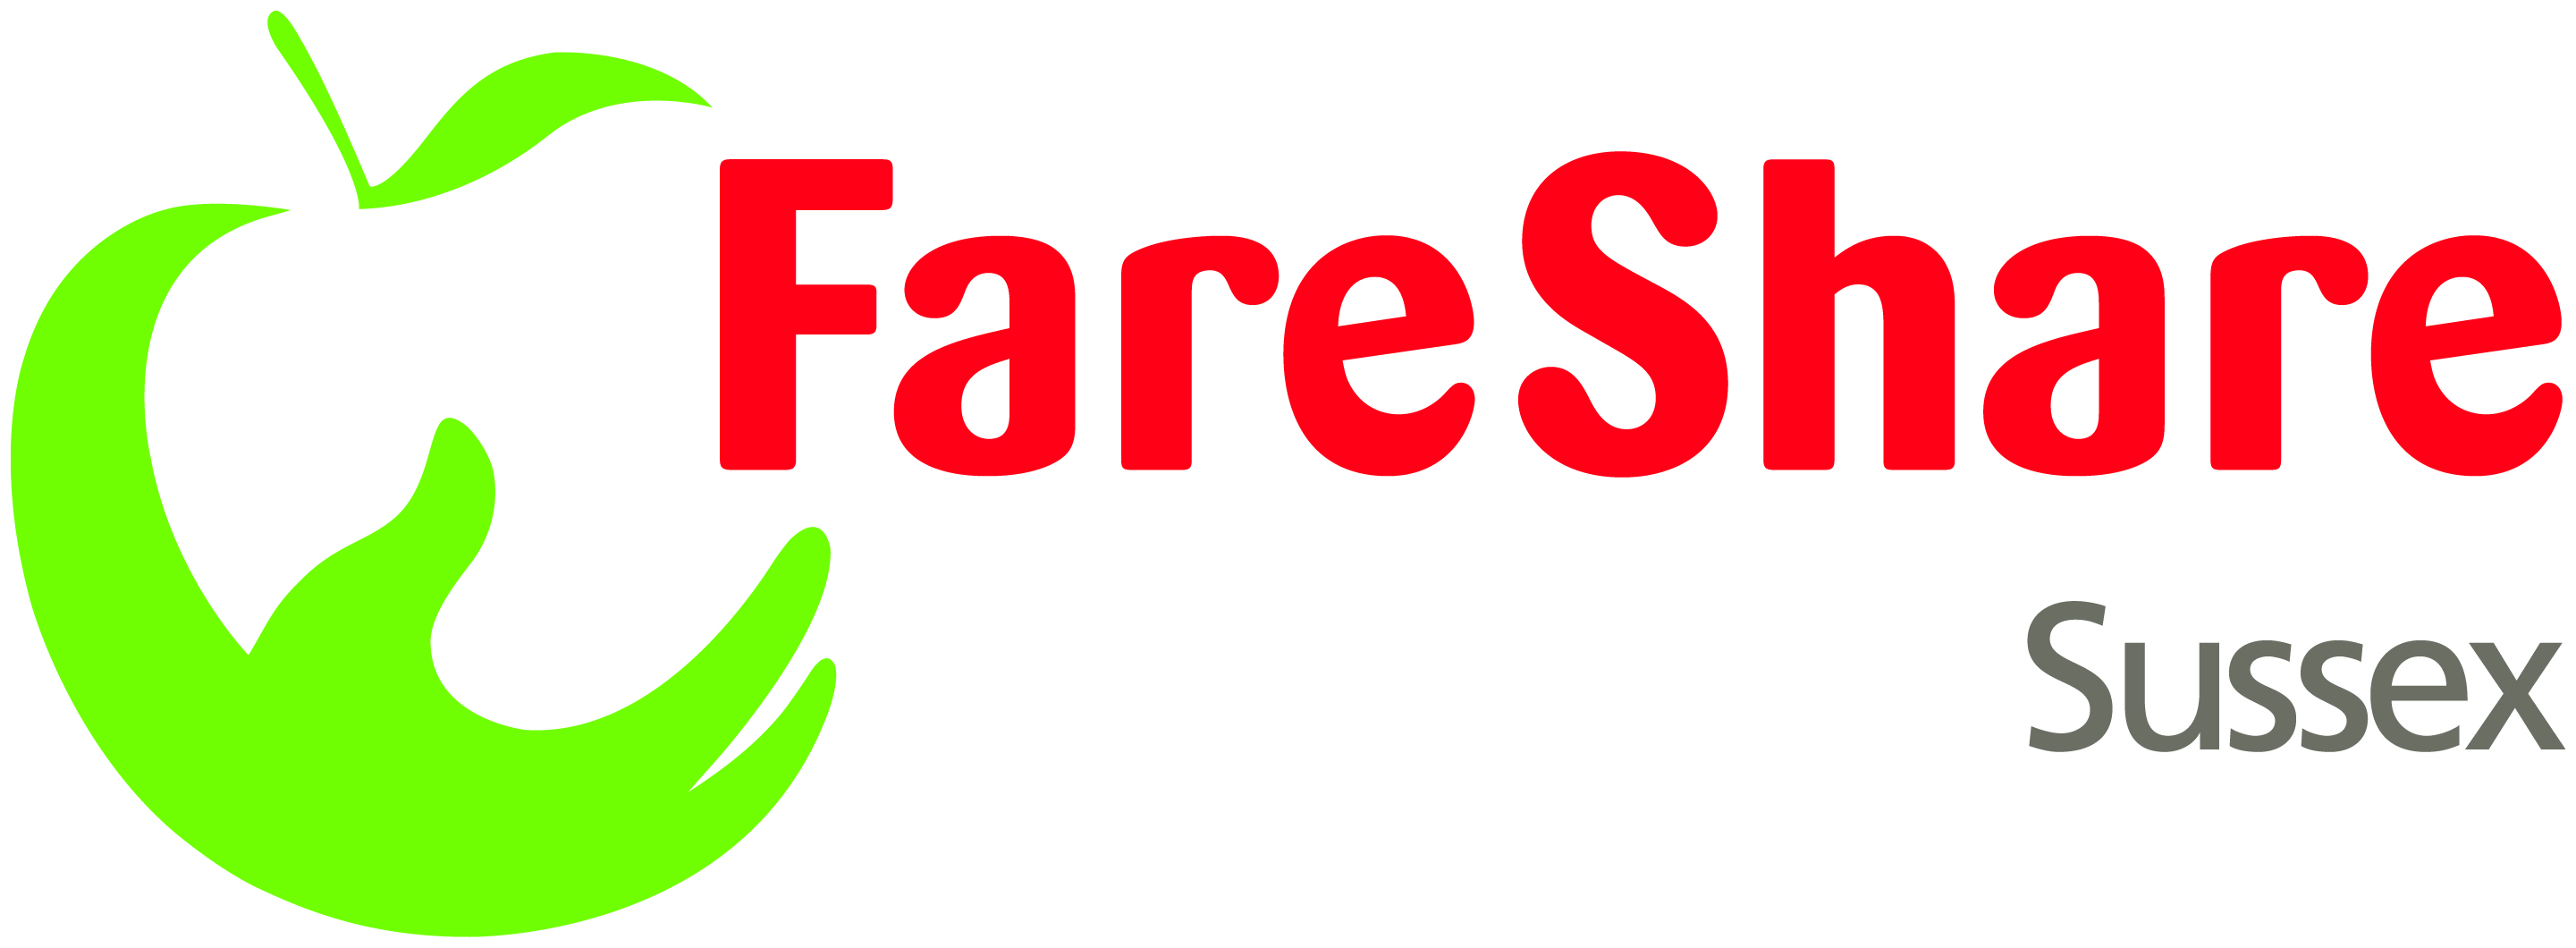 logo for FareShare Sussex